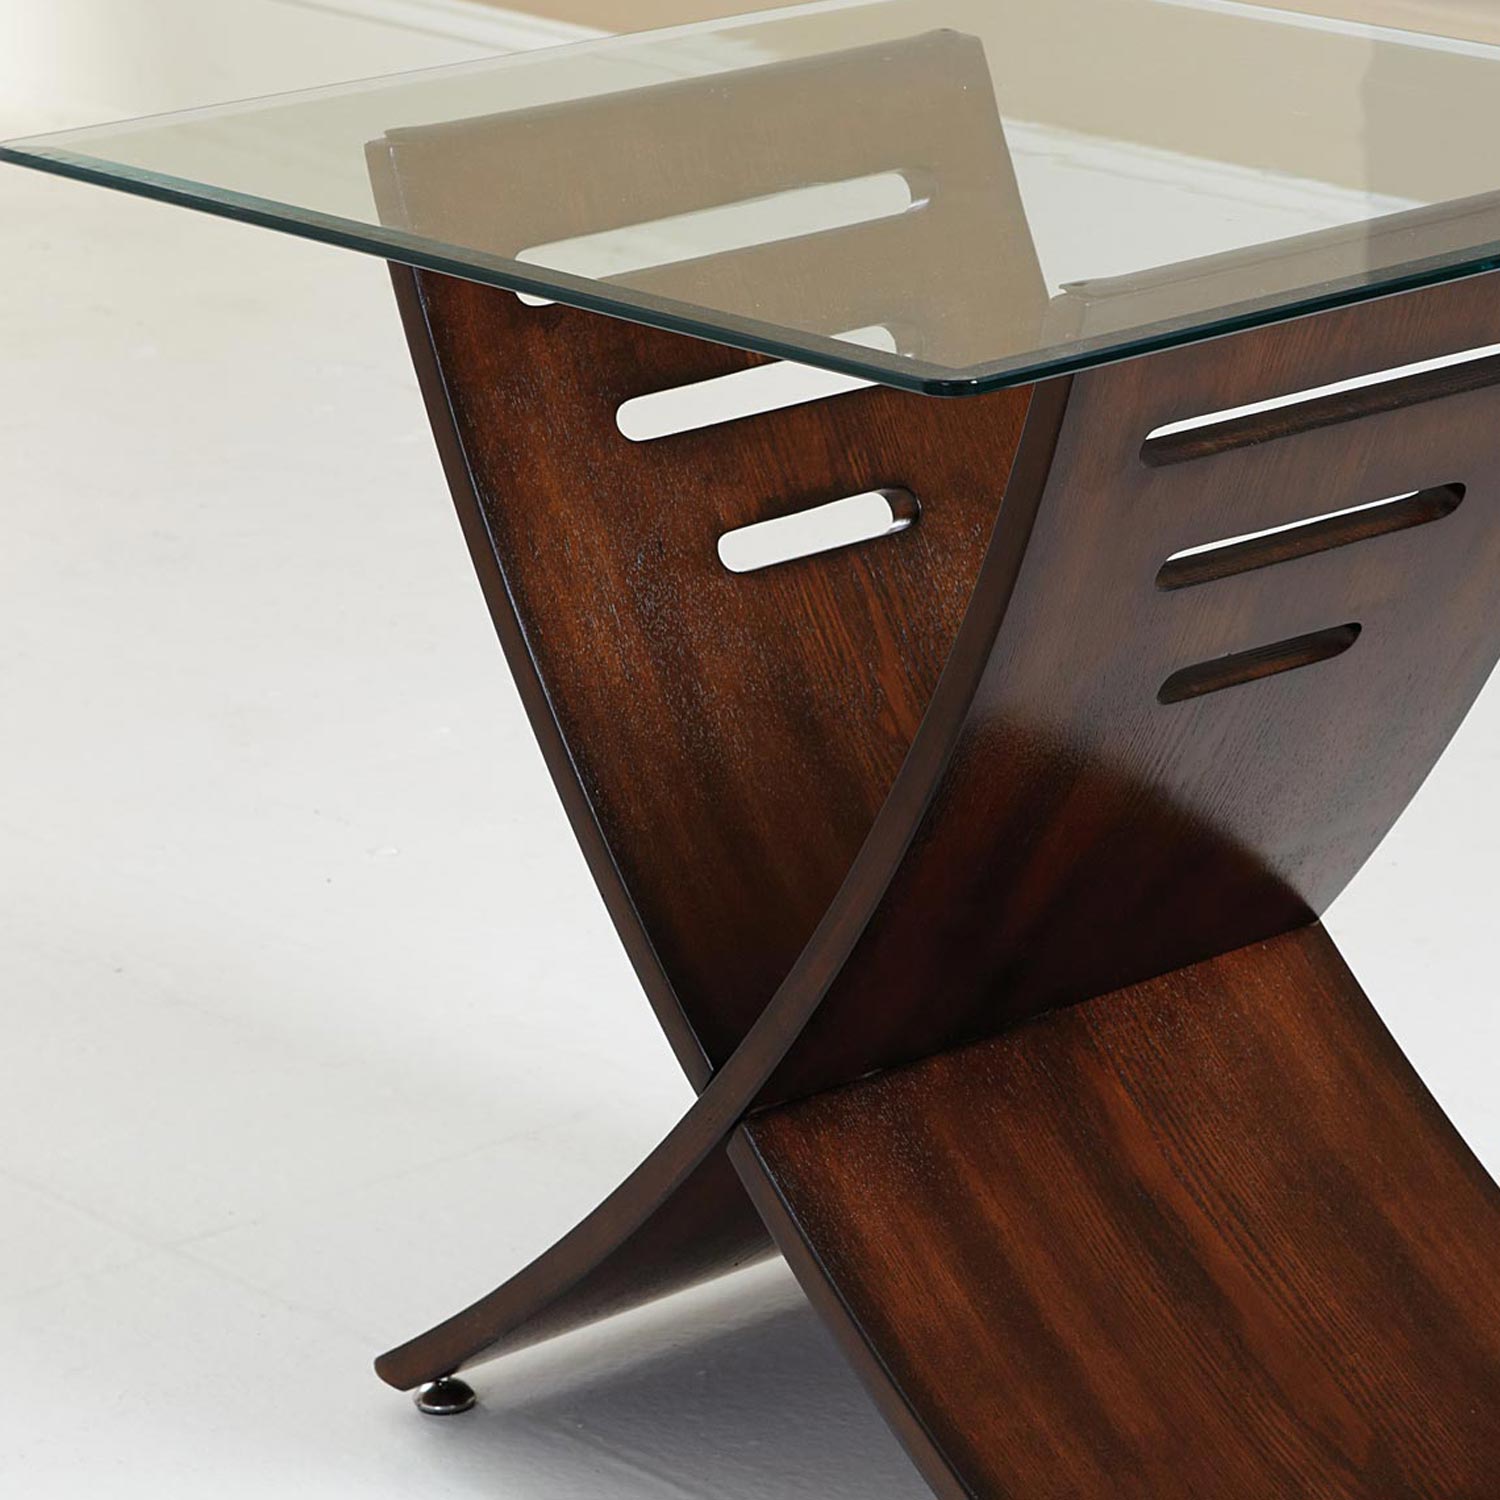 Cafe Occasional Tables Set - Beveled Glass, Dark Cherry Wood | DCG Stores